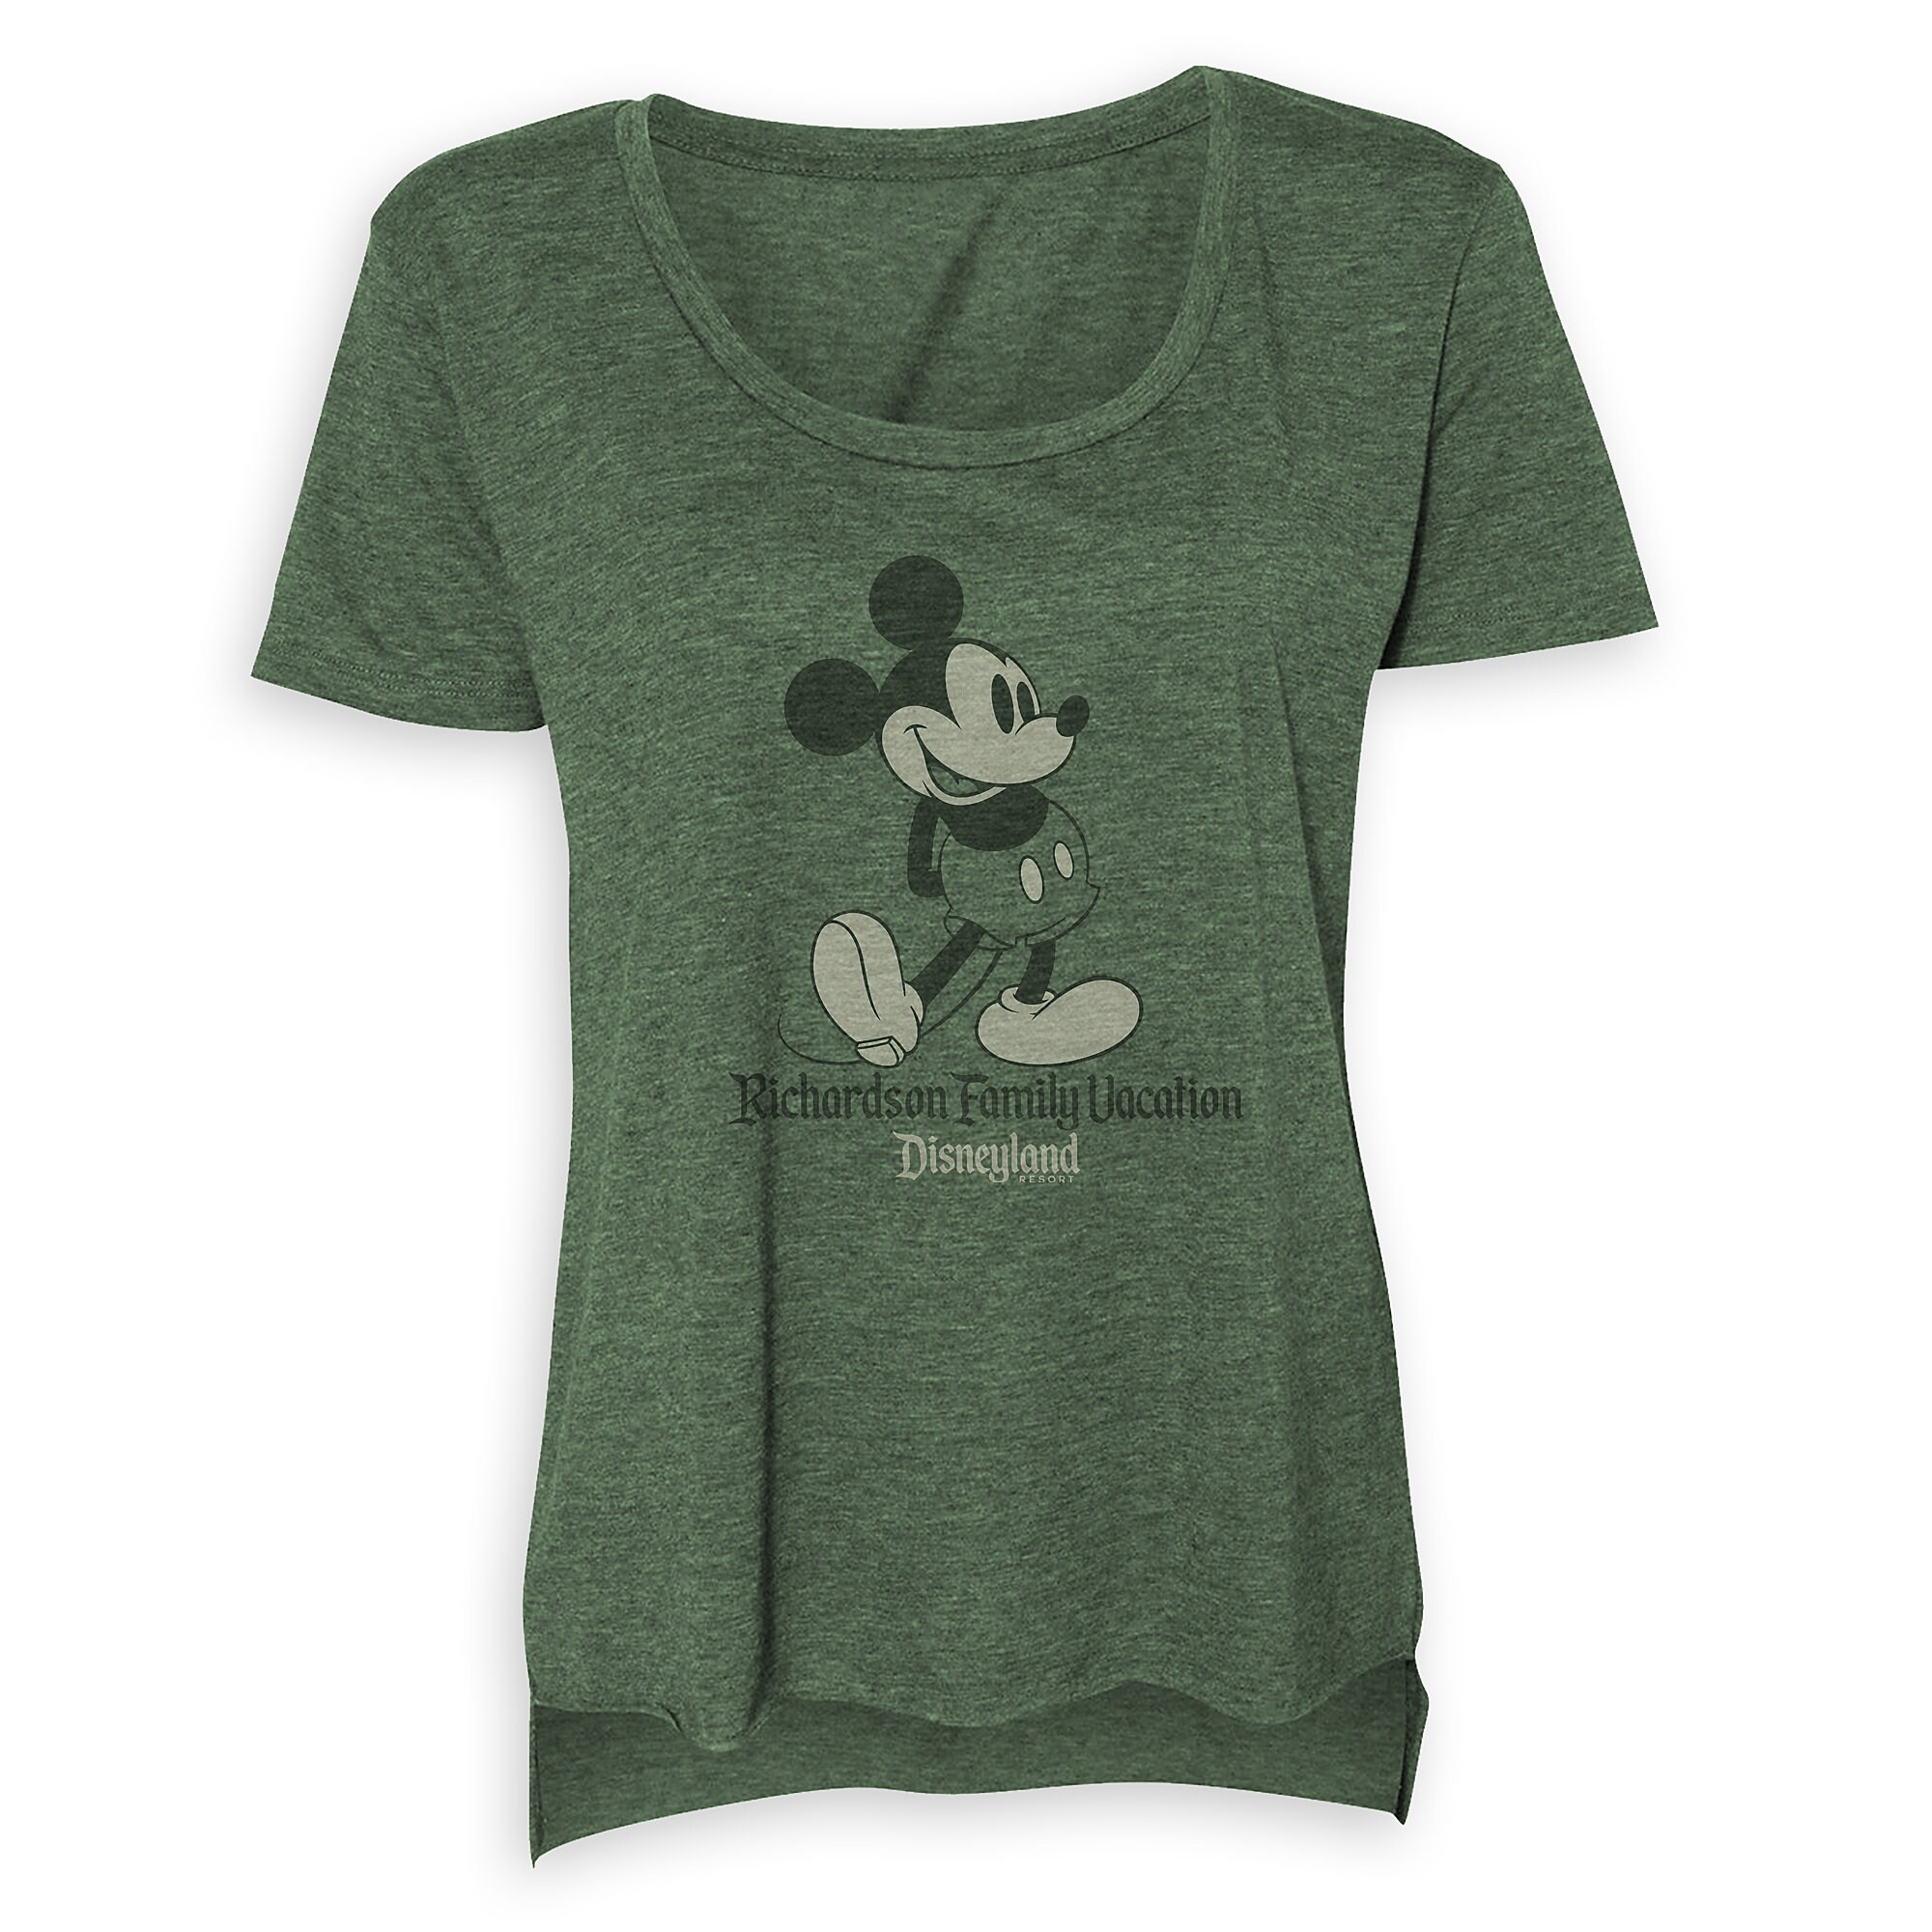 Women's Mickey Mouse Family Vacation Scoop Neck T-Shirt - Disneyland - Customized